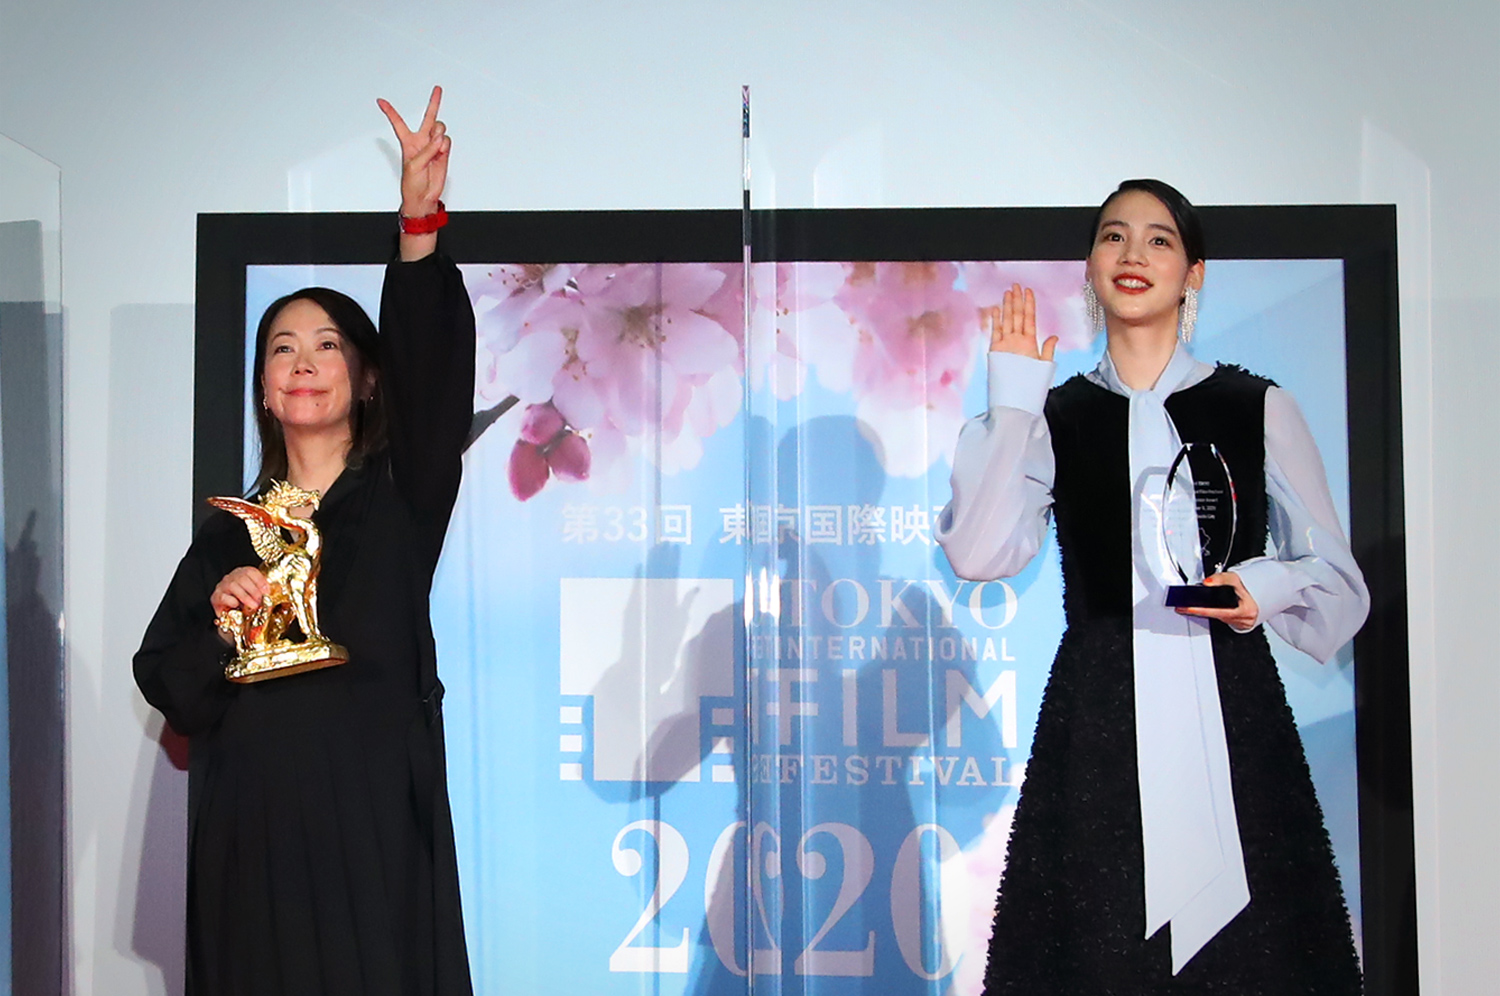 Audience award will go to Director Akiko Ohku’s "Hold Me Back&quat;.